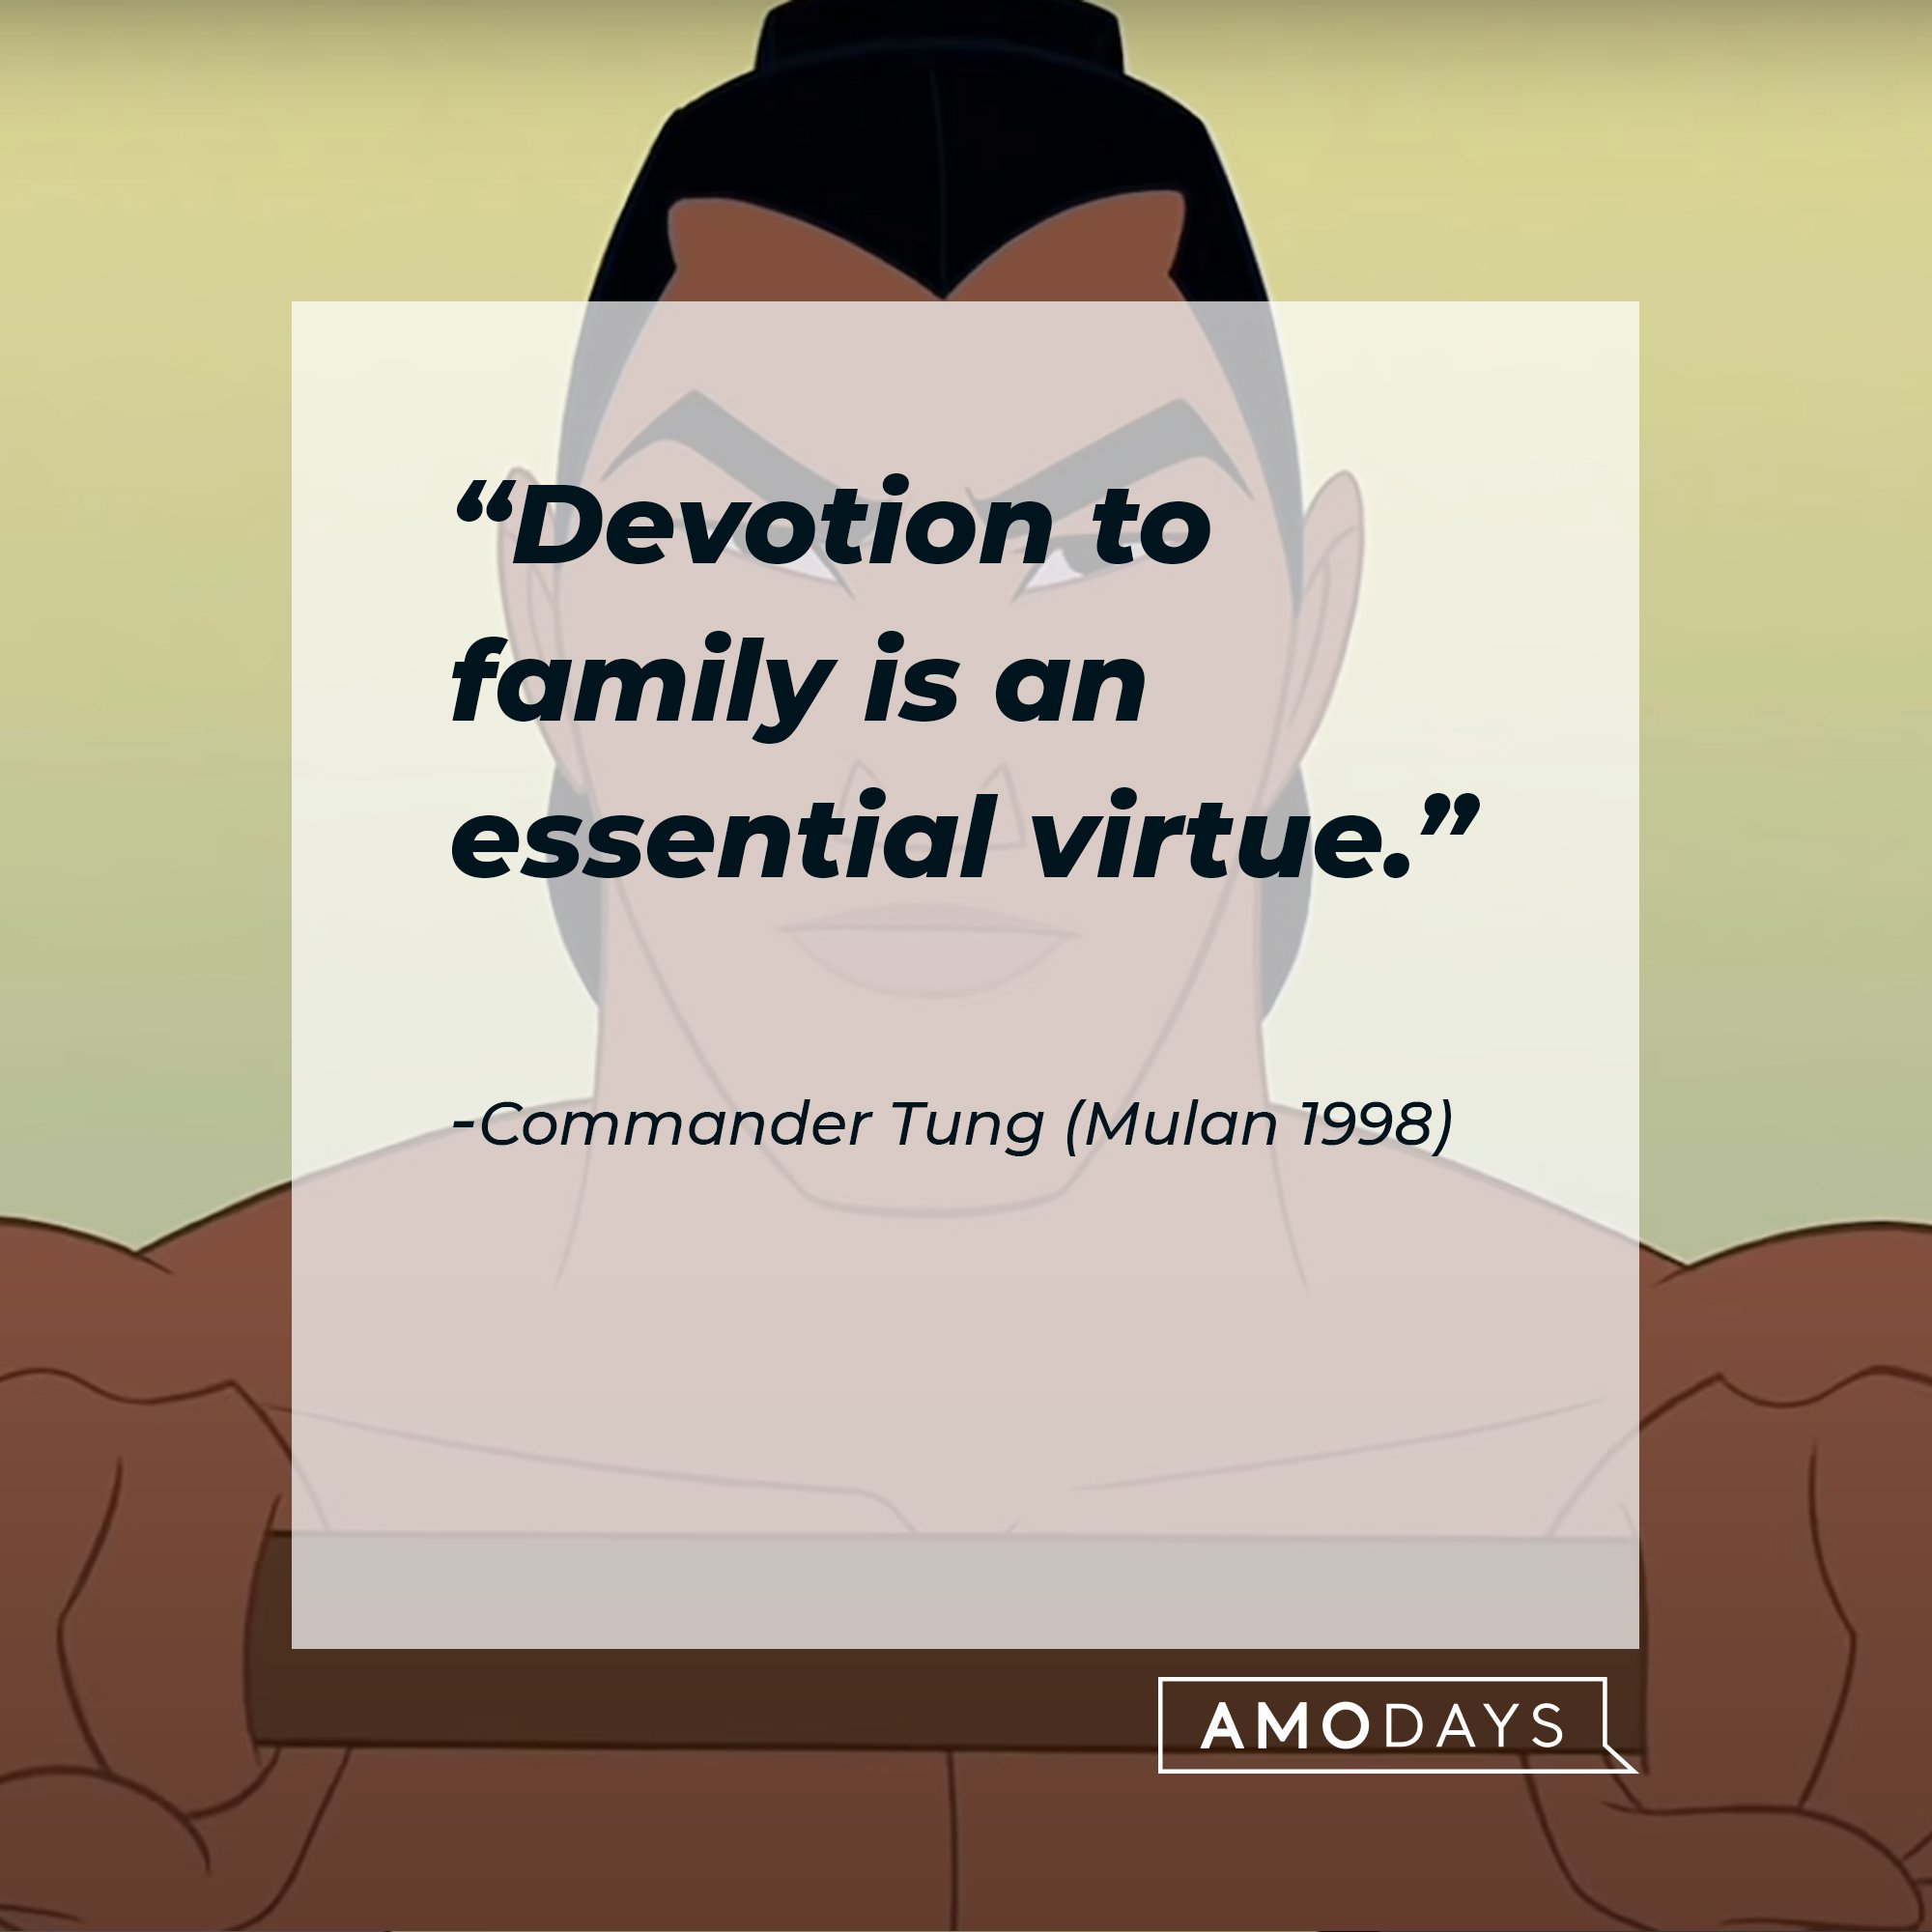  Commander Tung’s quote: “Devotion to family is an essential virtue.” | Image: AmoDays